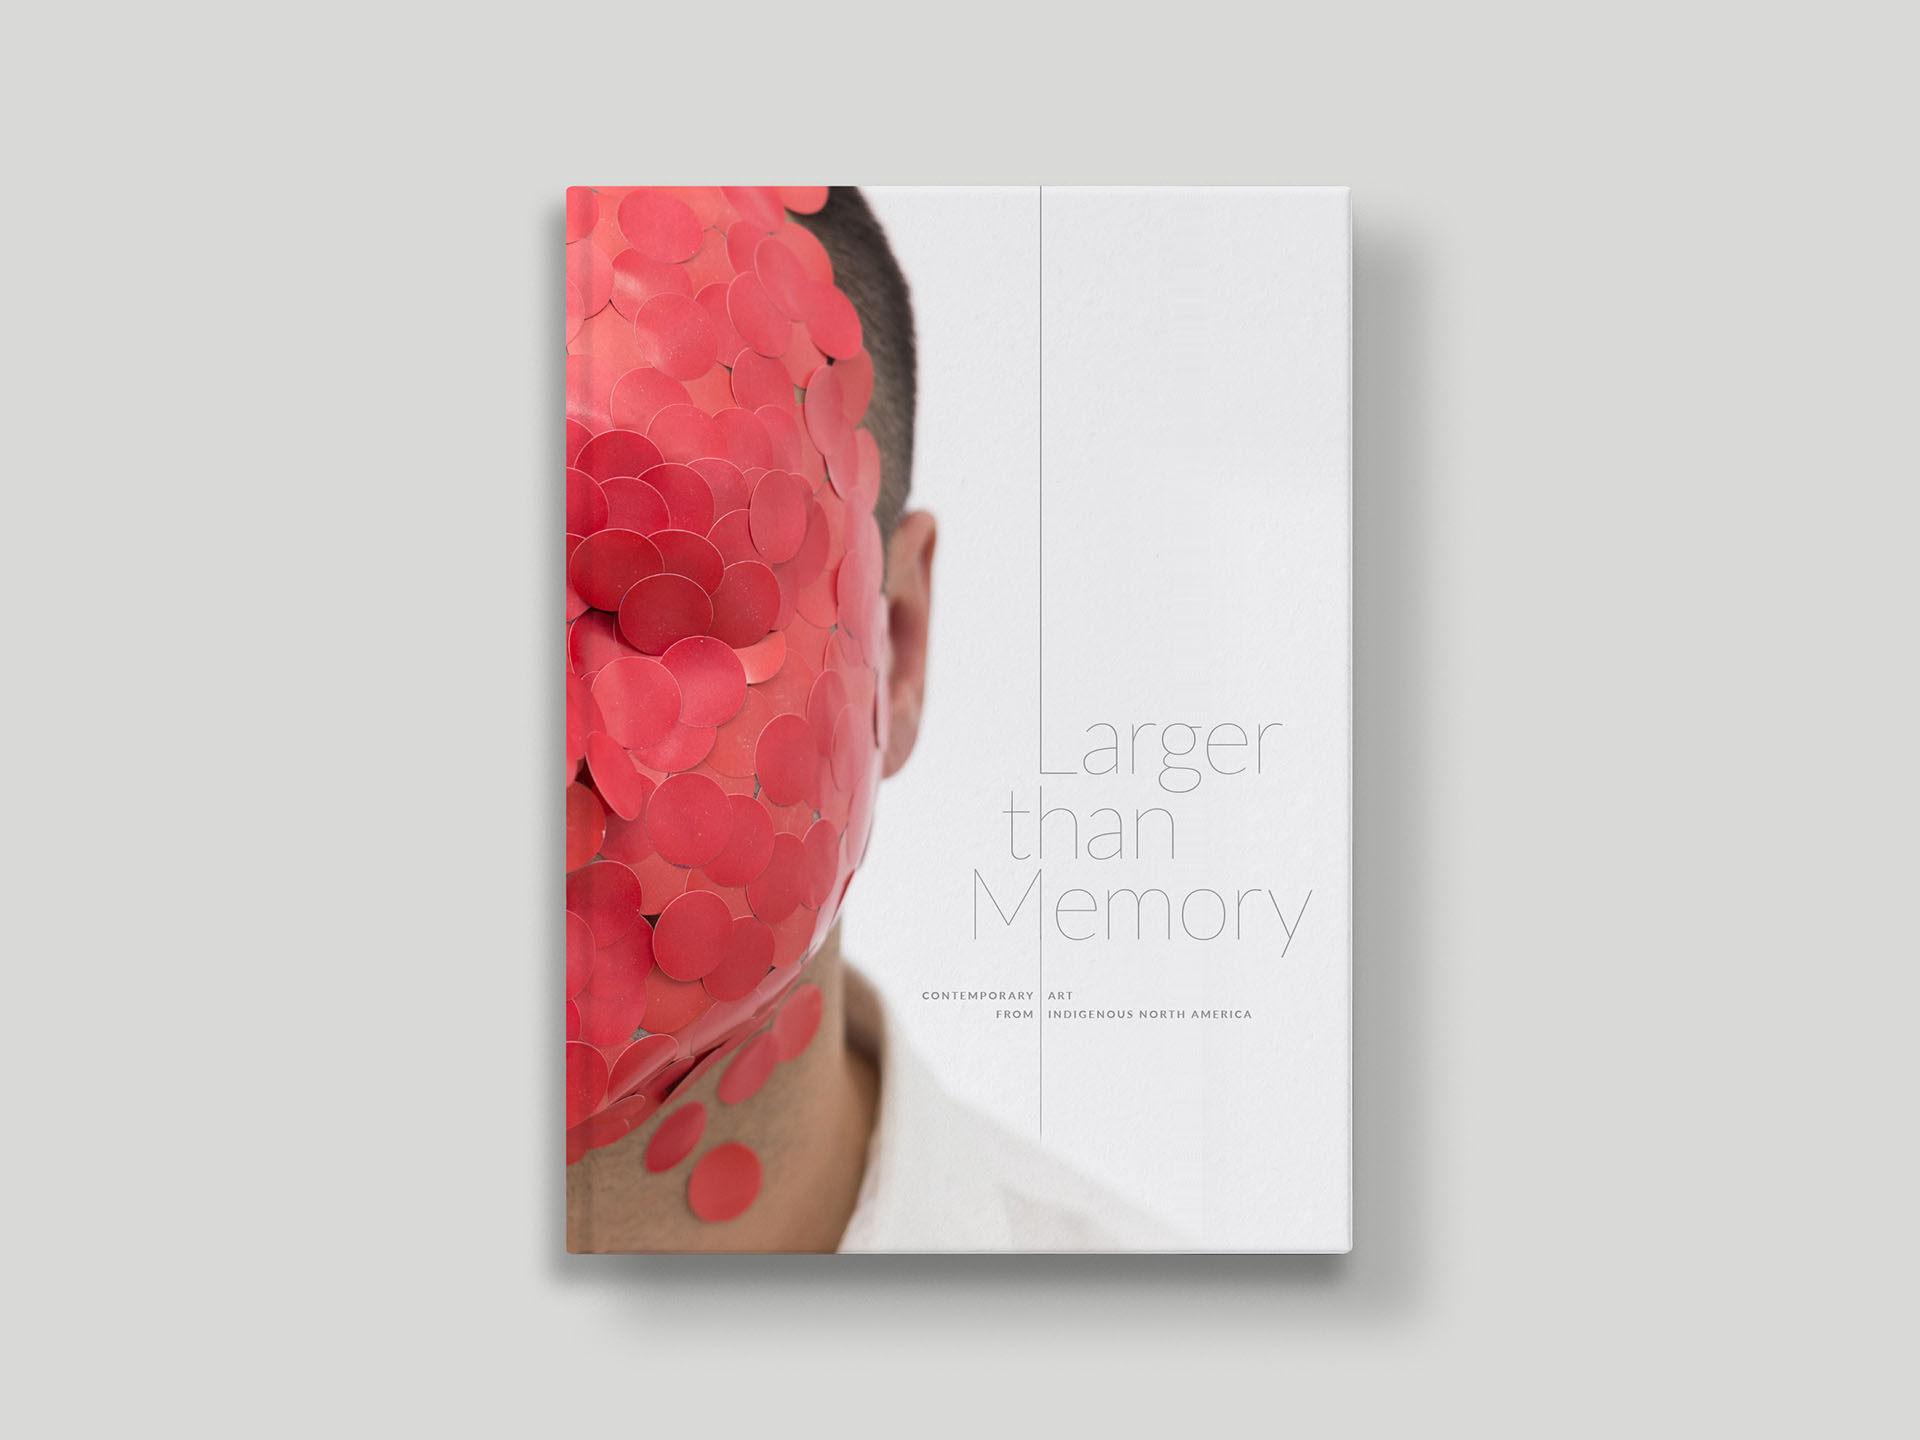 heard-largerthanmemory_book-cover-limited